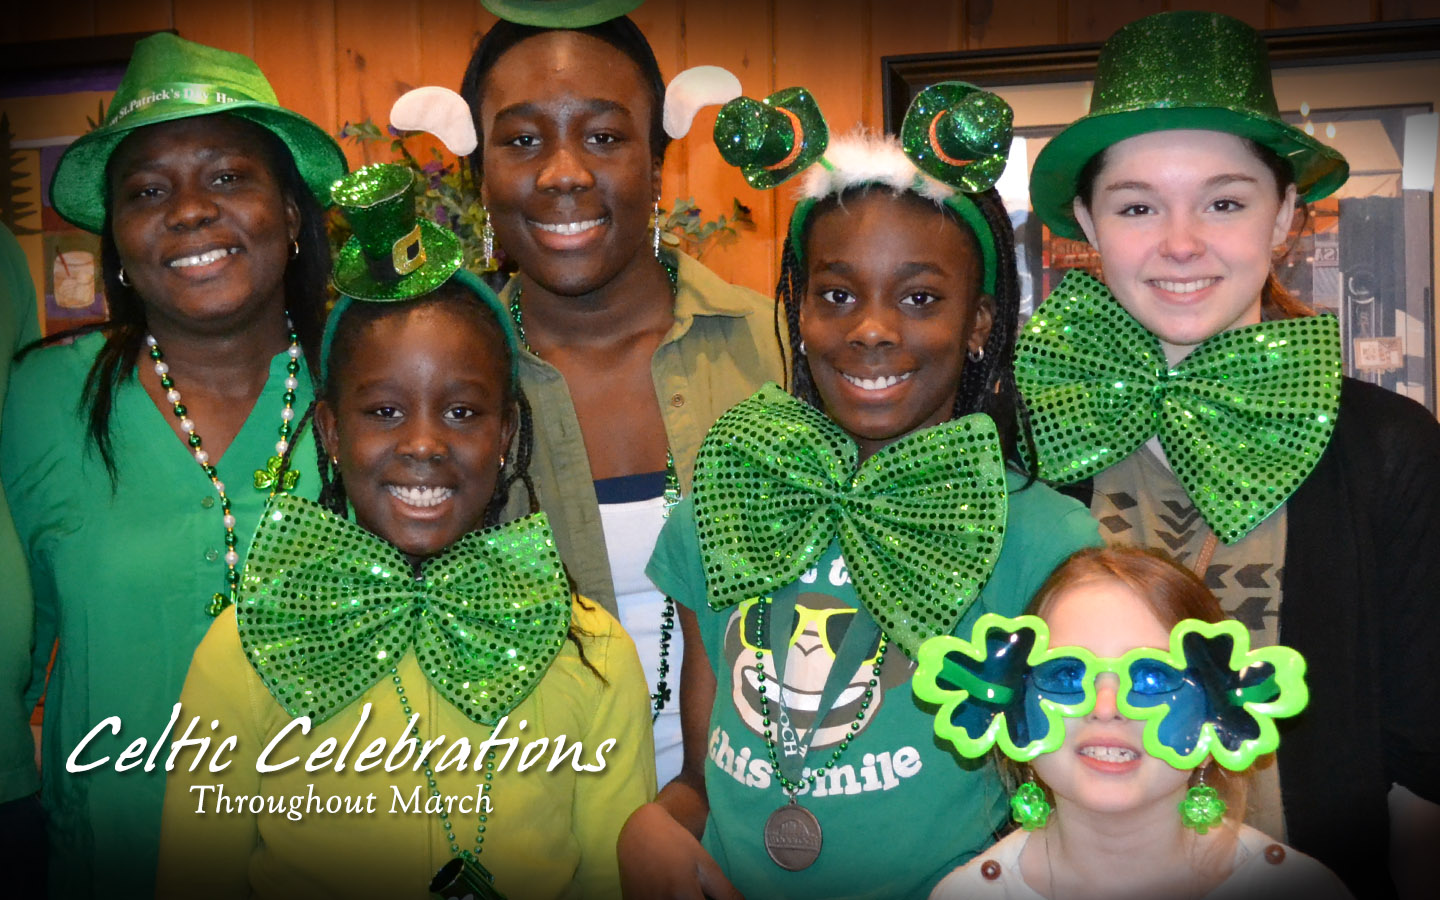 Group in St. Patrick's day costumes. Text: Celtic celebrations throughout March.